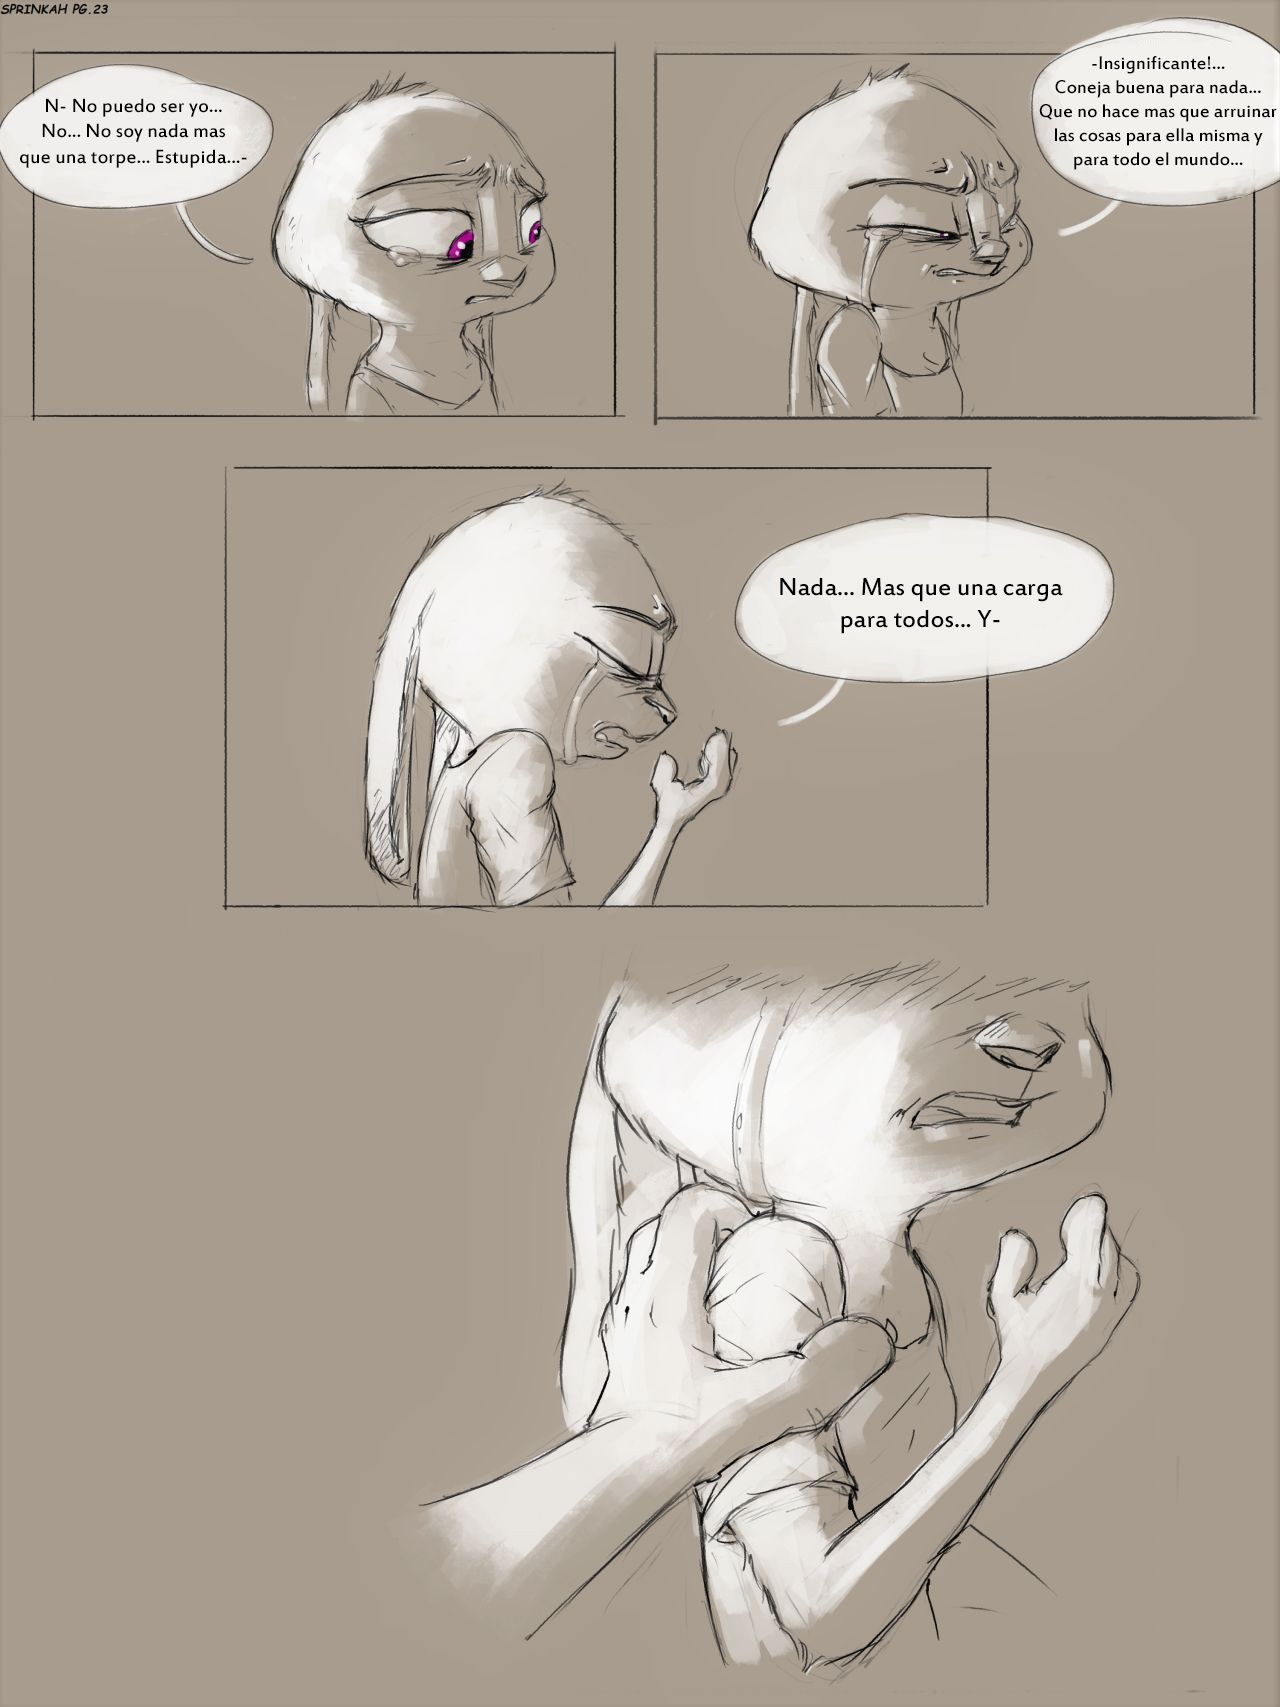 [Sprinkah] This is what true love looks like (Zootopia) (Spanish) (On Going) [Landsec] http://sprinkah.tumblr.com/ 34